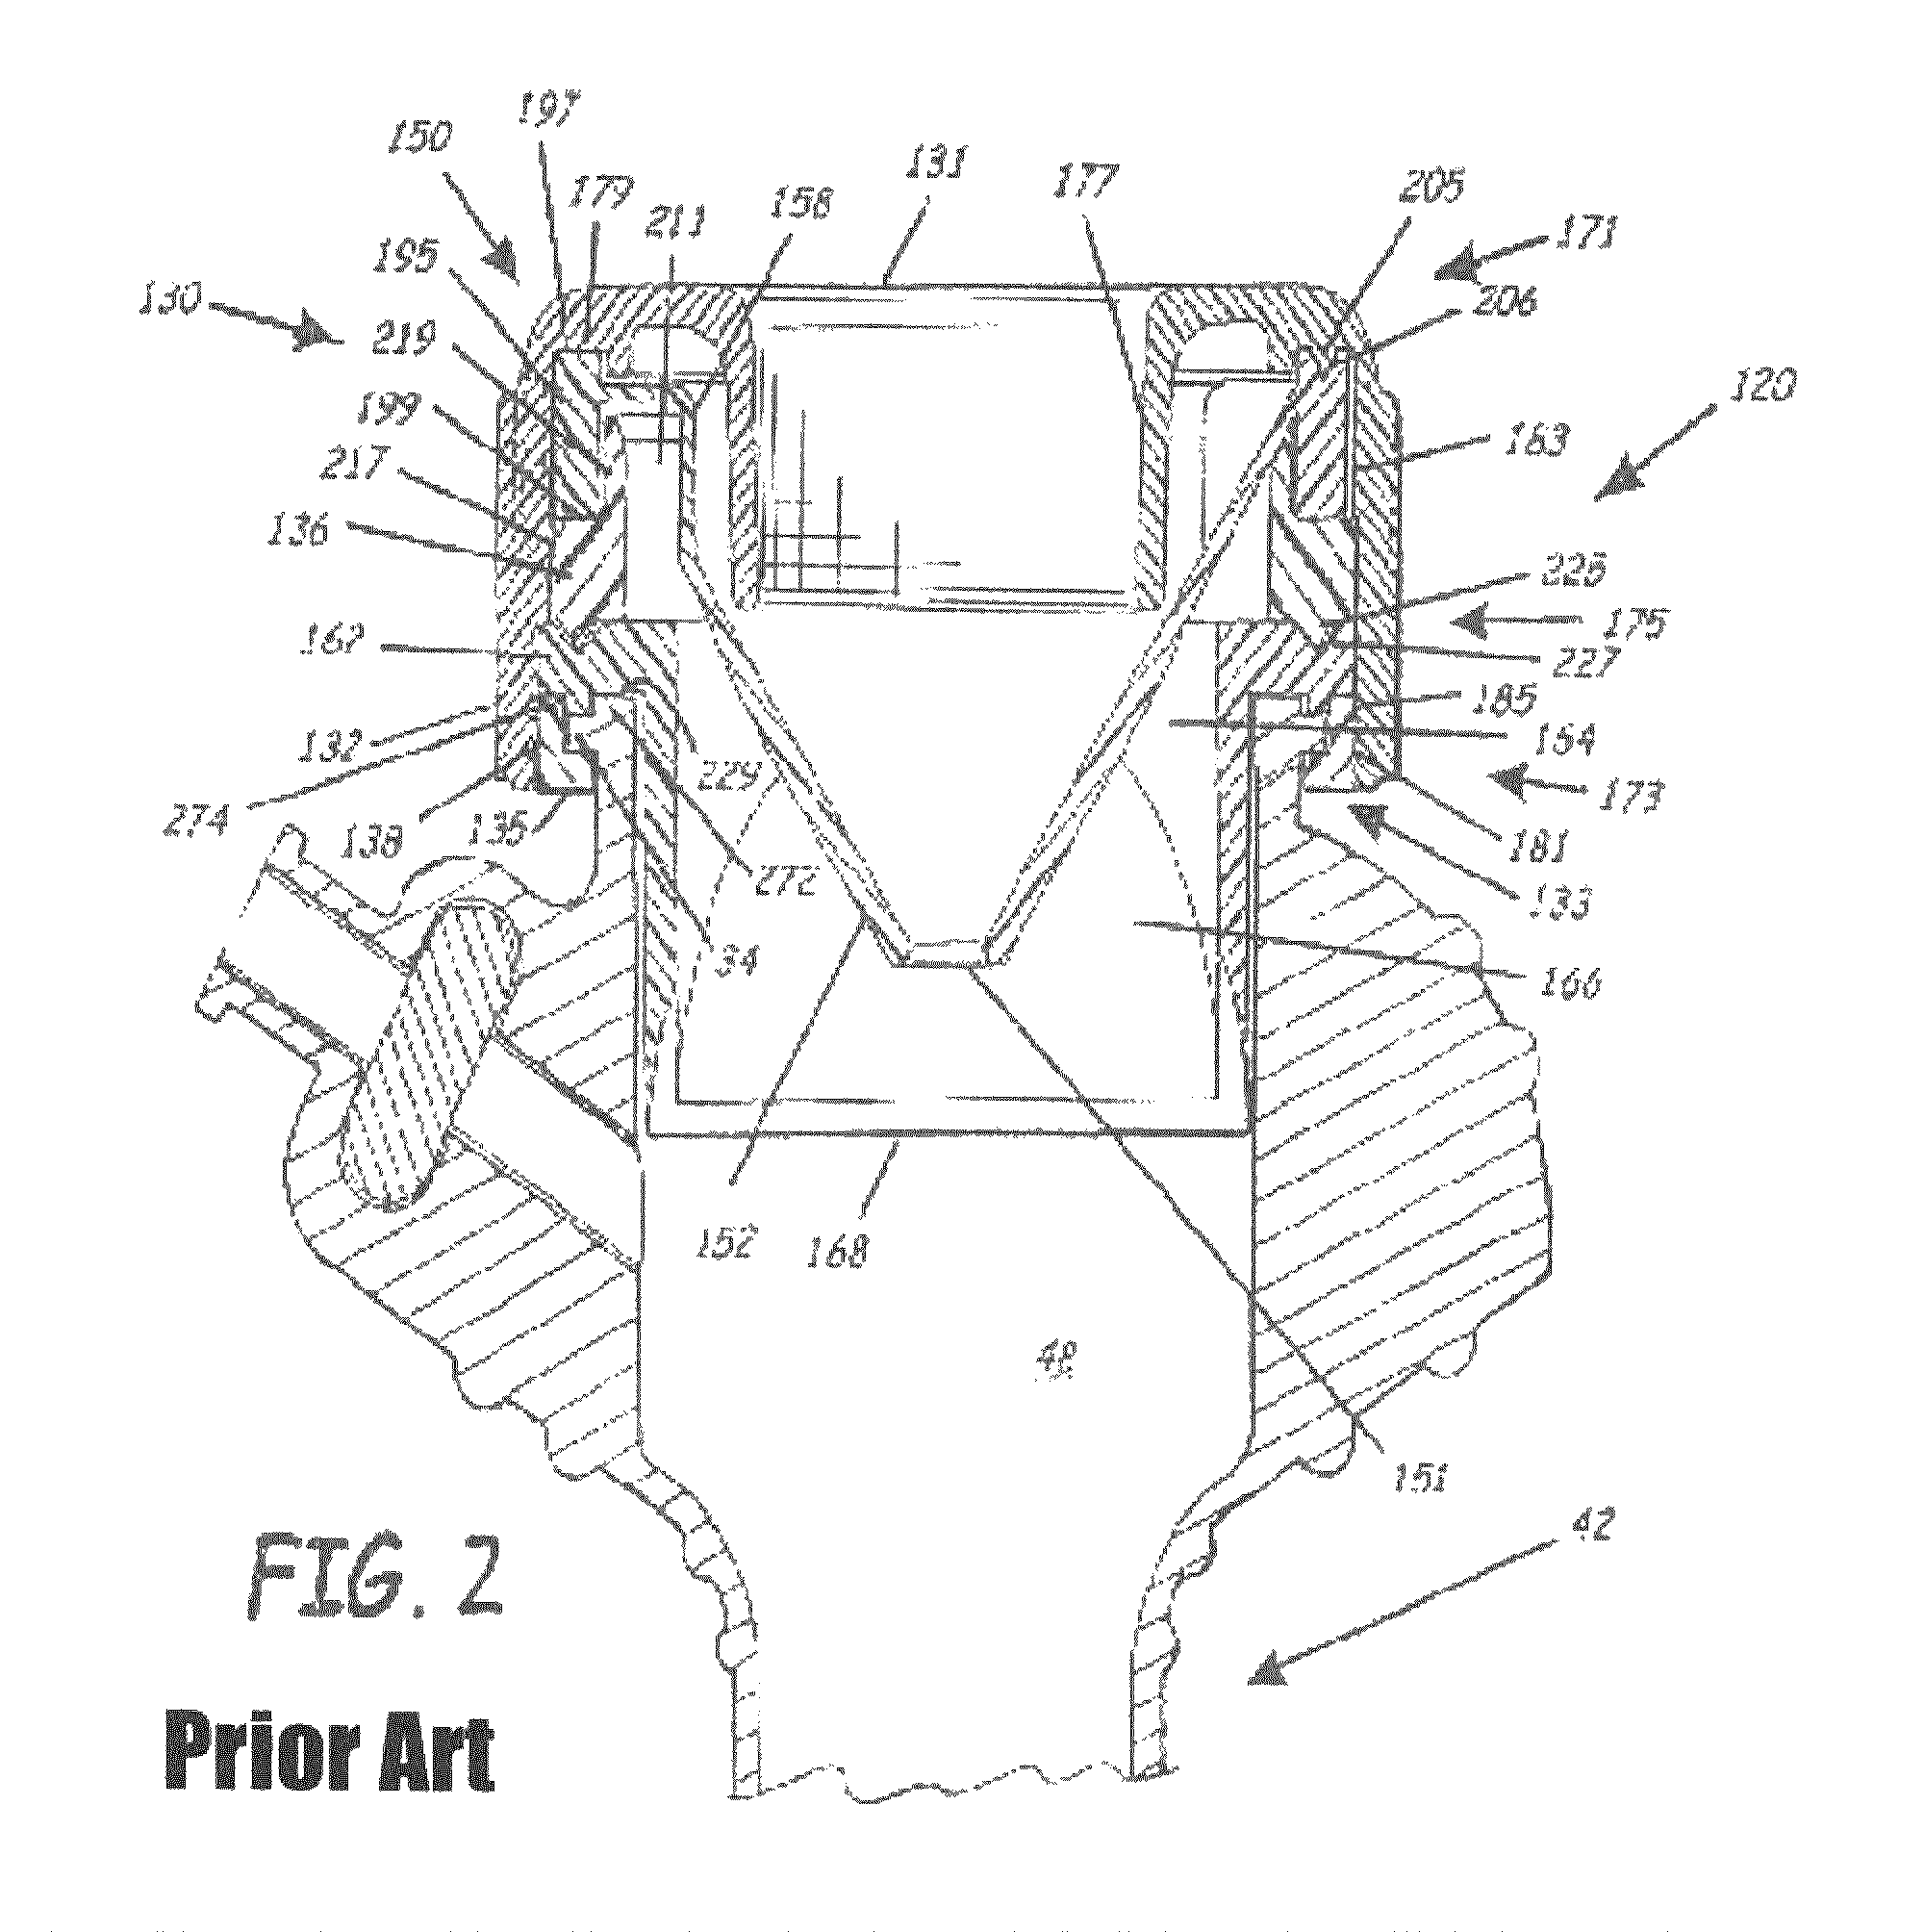 Trocar and cannula assembly having improved conical valve, and methods related thereto